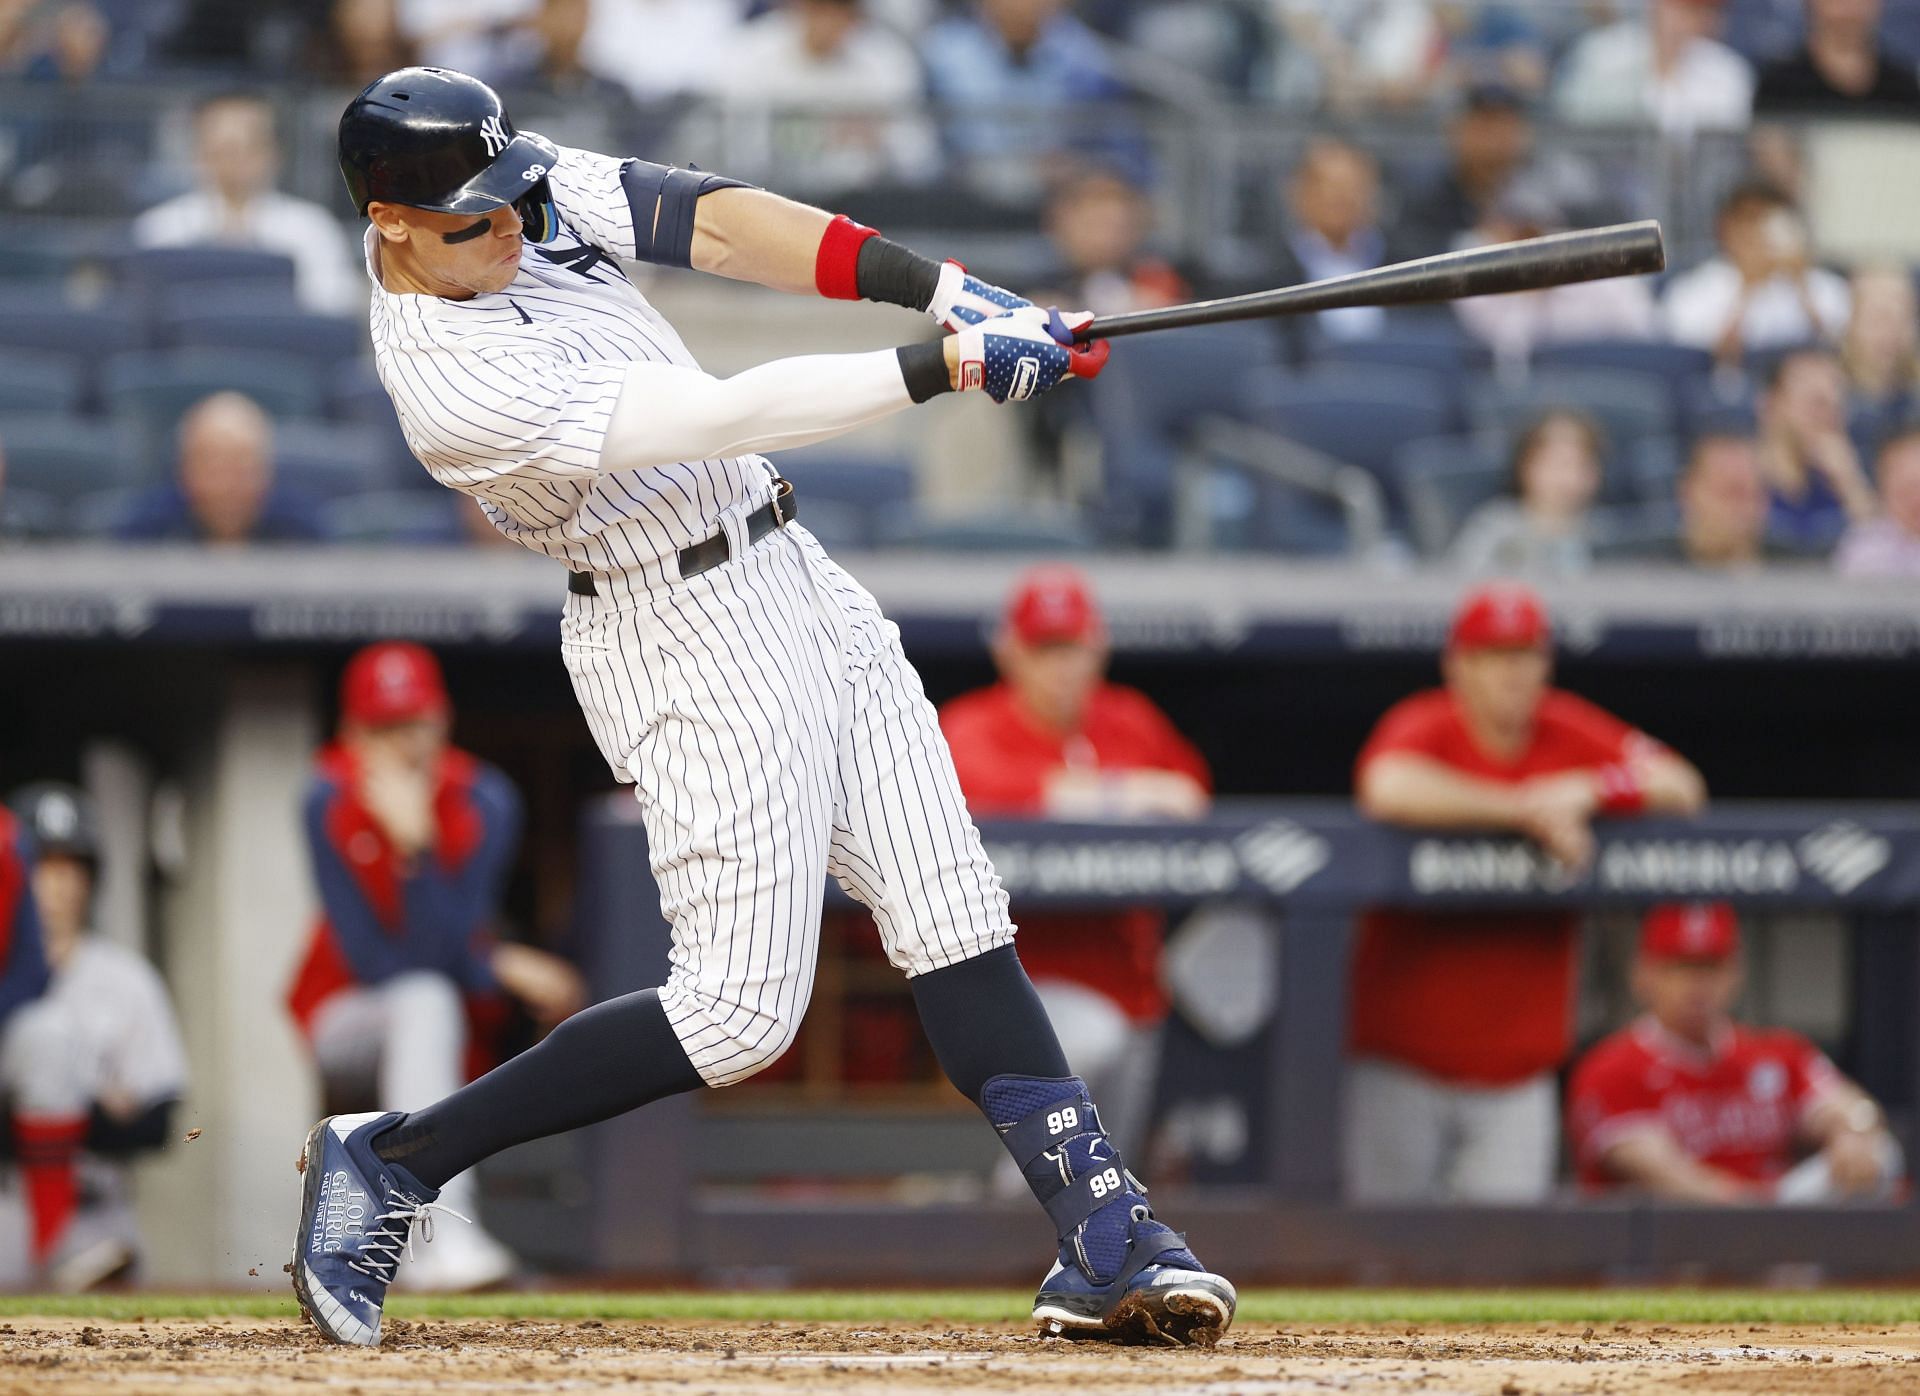 Aaron Judge takes a swing during a New York Yankees v Los Angeles Angels game.